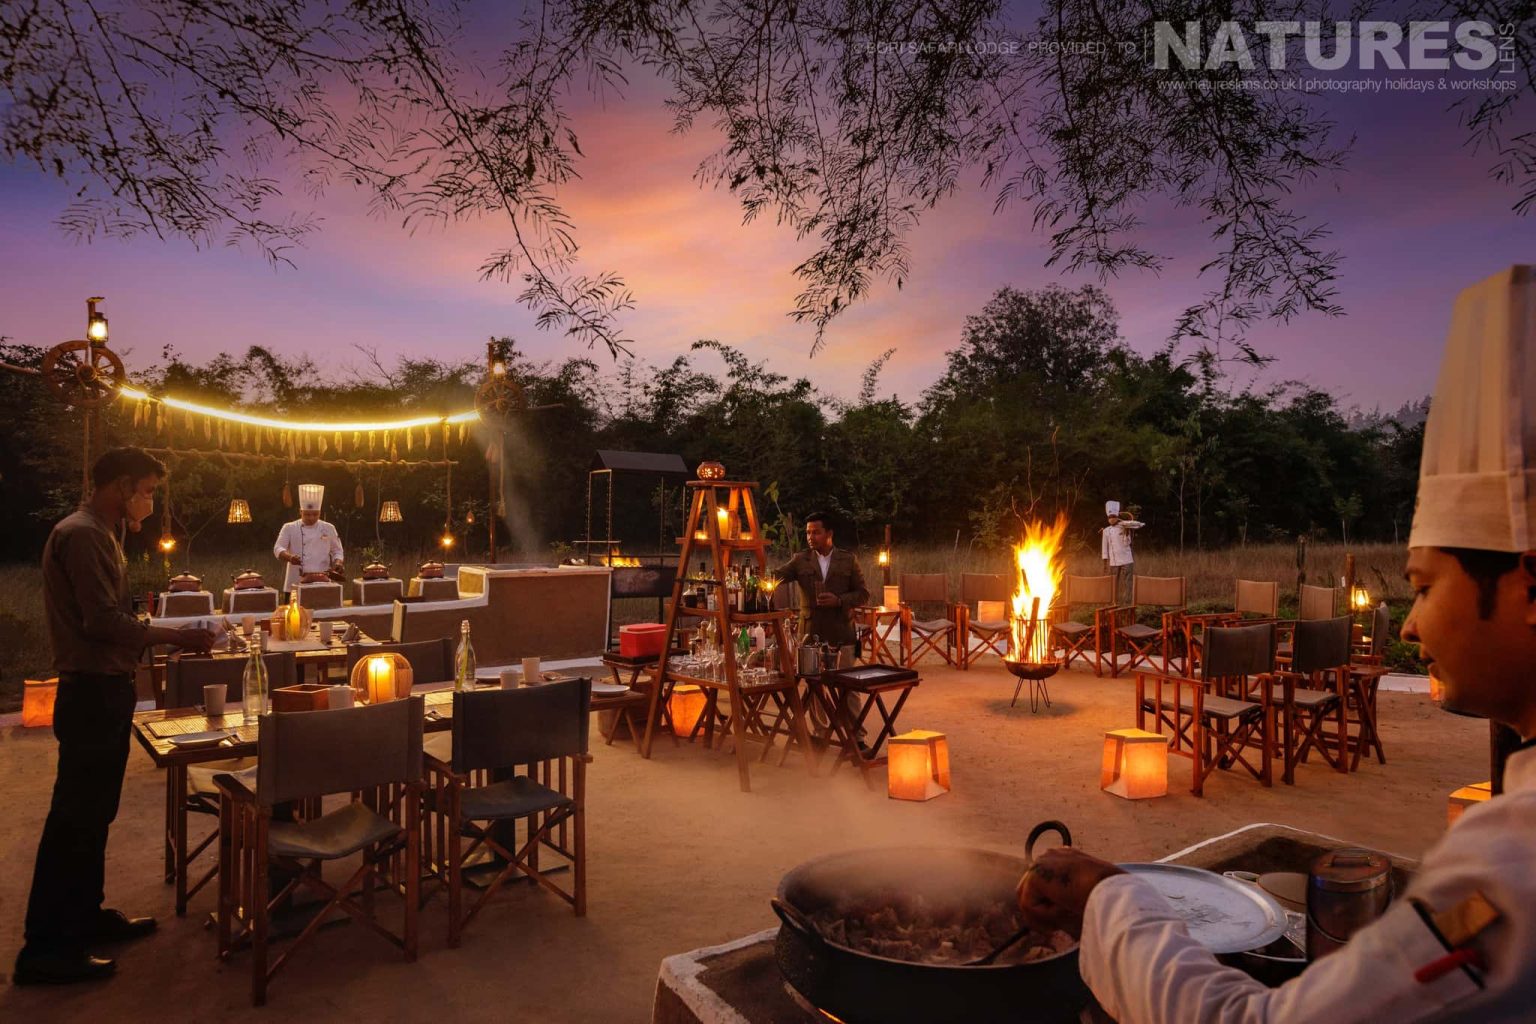 External Dining at sunset is one of the options at Bori Safari Lodge